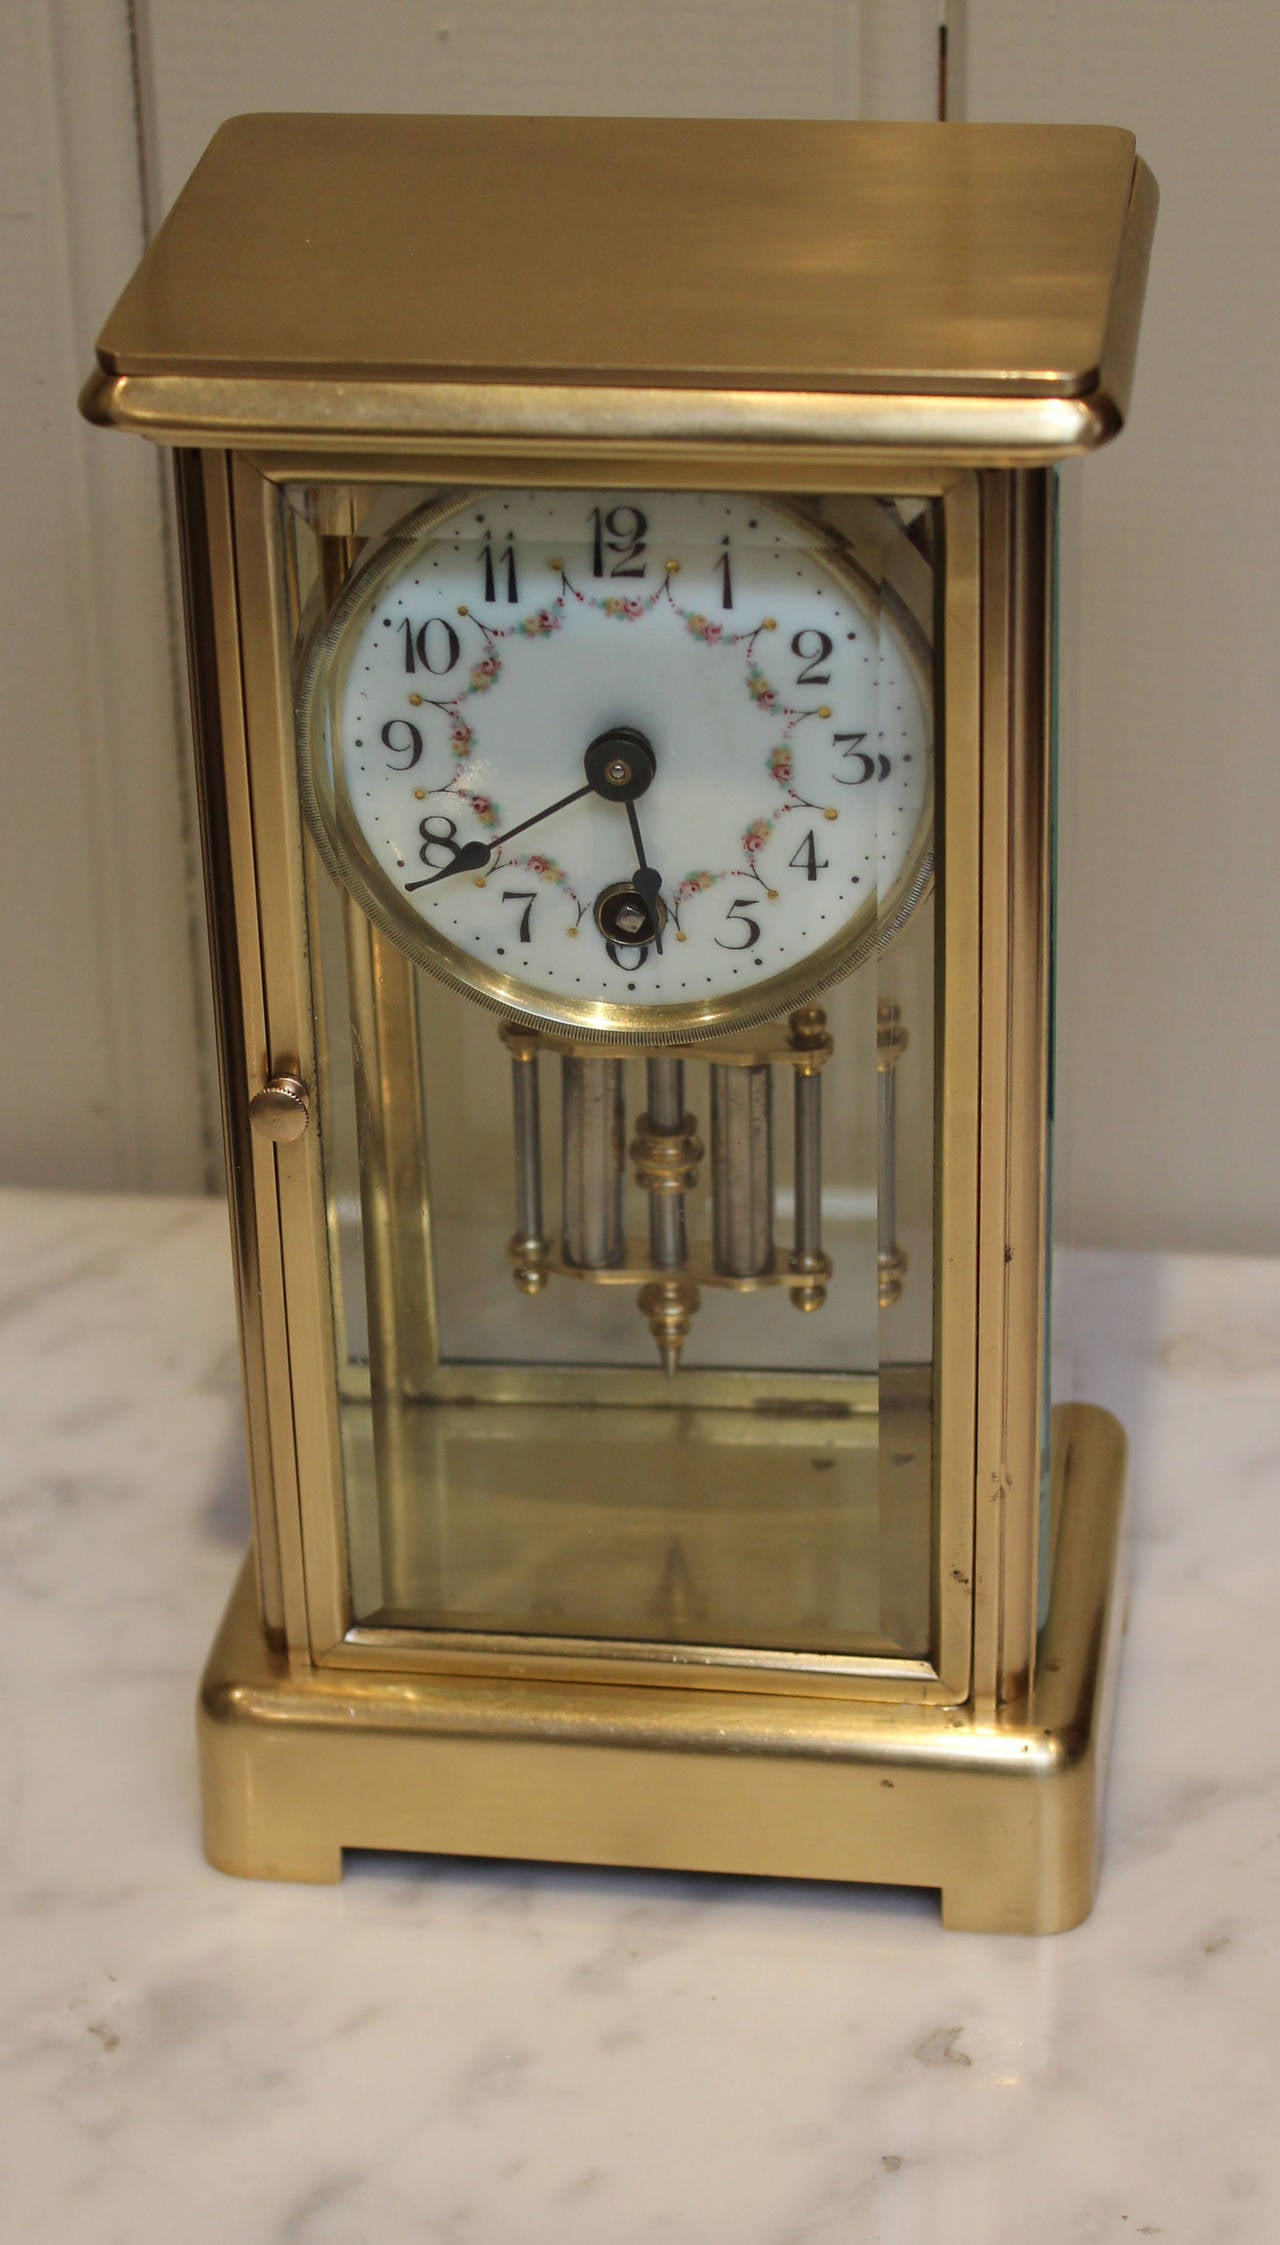 A small, timepiece four glass clock, having a plain brass case with bevel edge glass to the sides, and front. It has an 8 day pendulum movement, with a floral enamel and a simulated mercury pendulum.